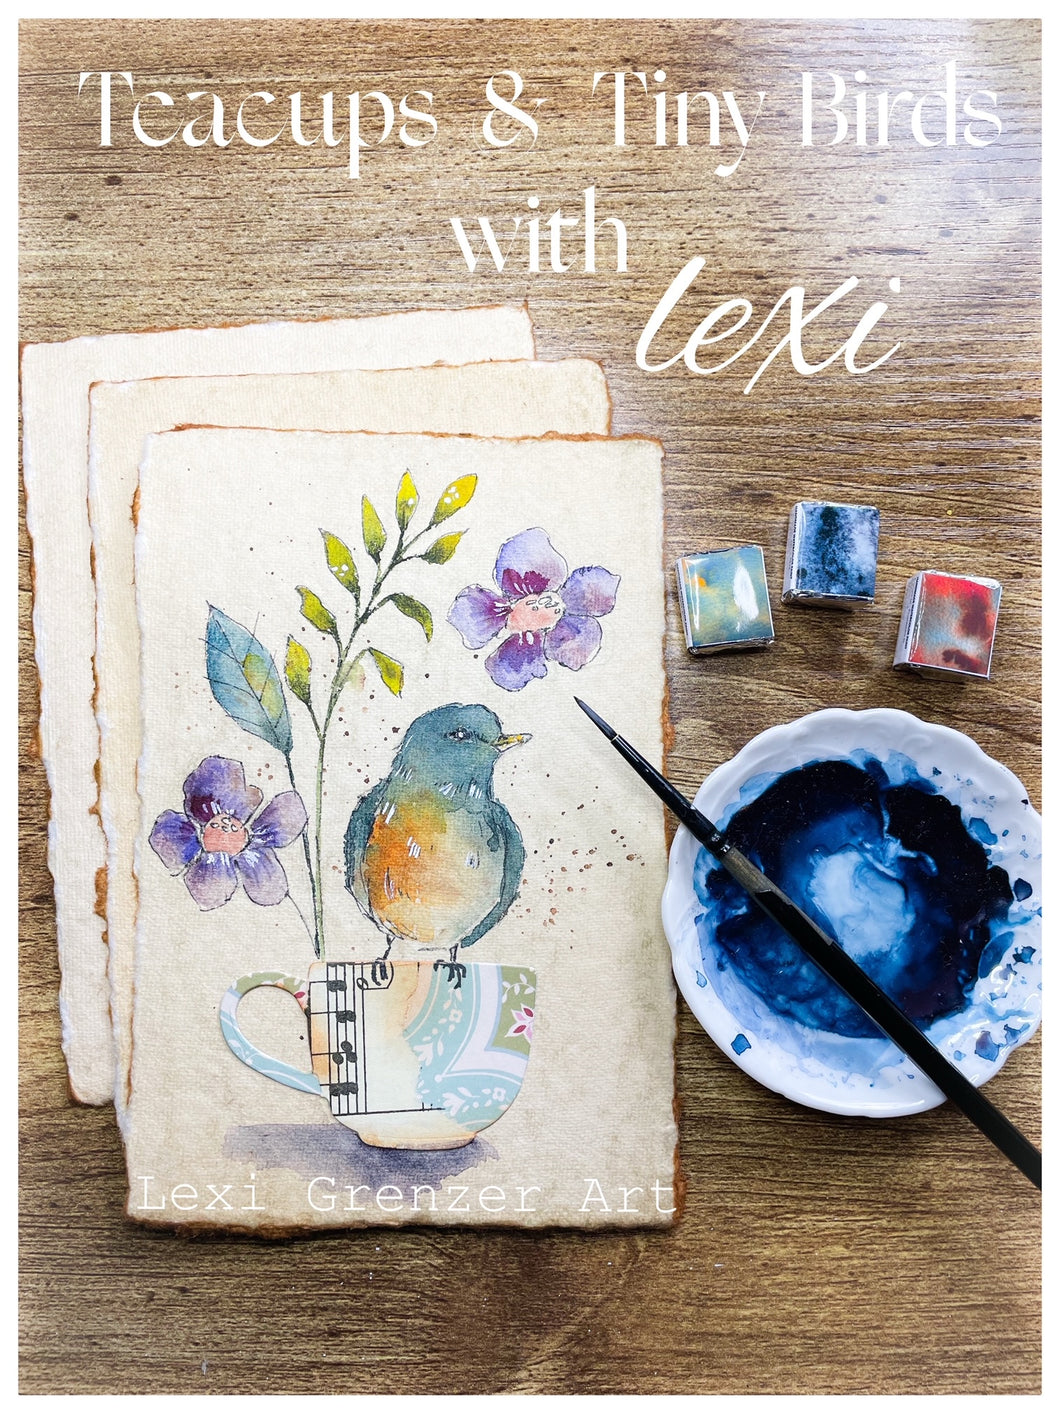 (April 27th Session) Teacups & Tiny Birds with Lexi Grenzer